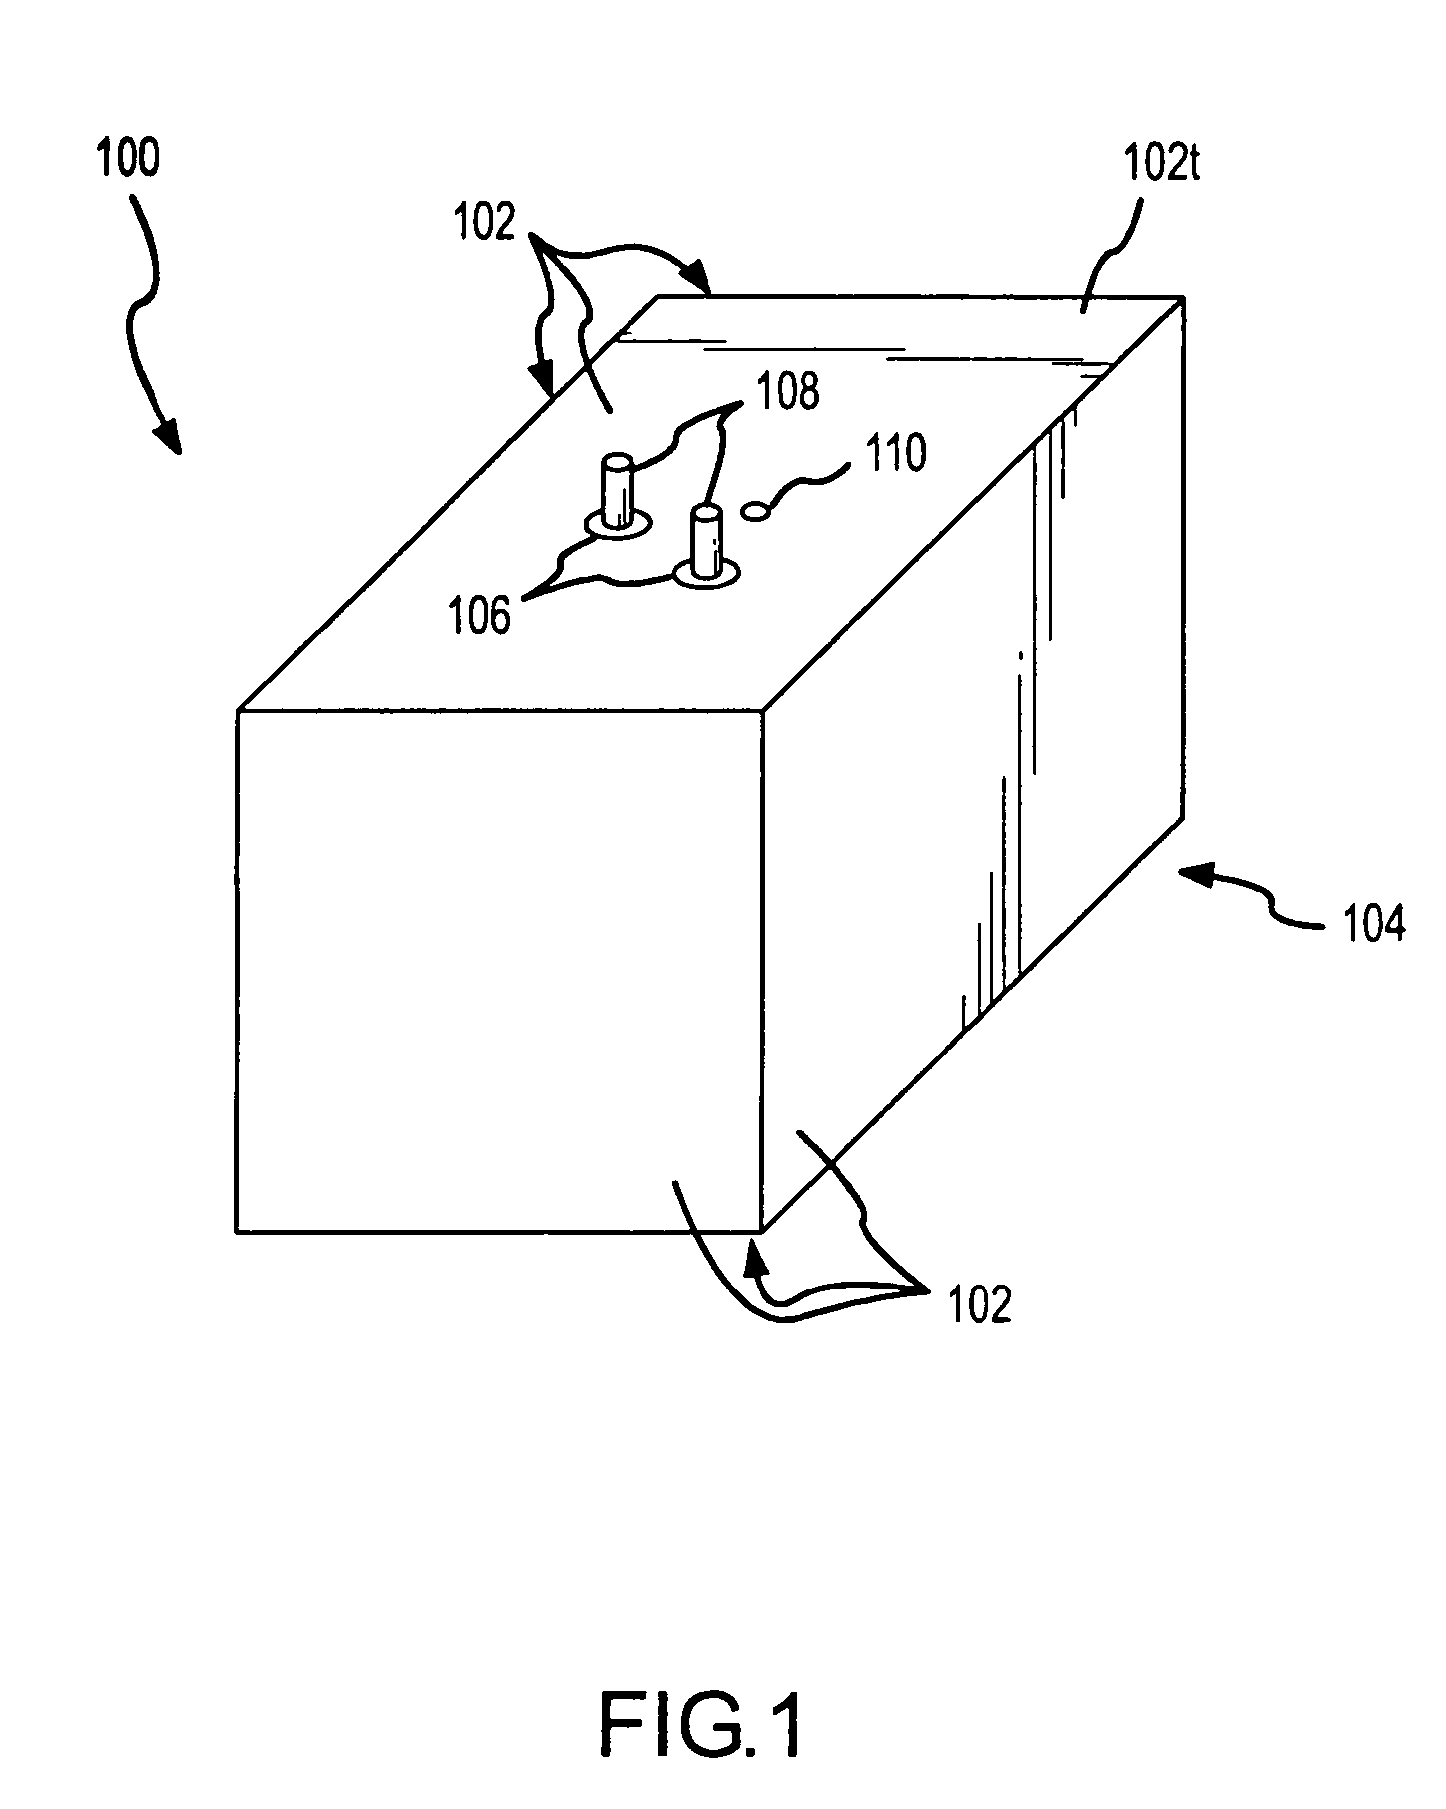 Method and apparatus to control an antenna efficiency test device